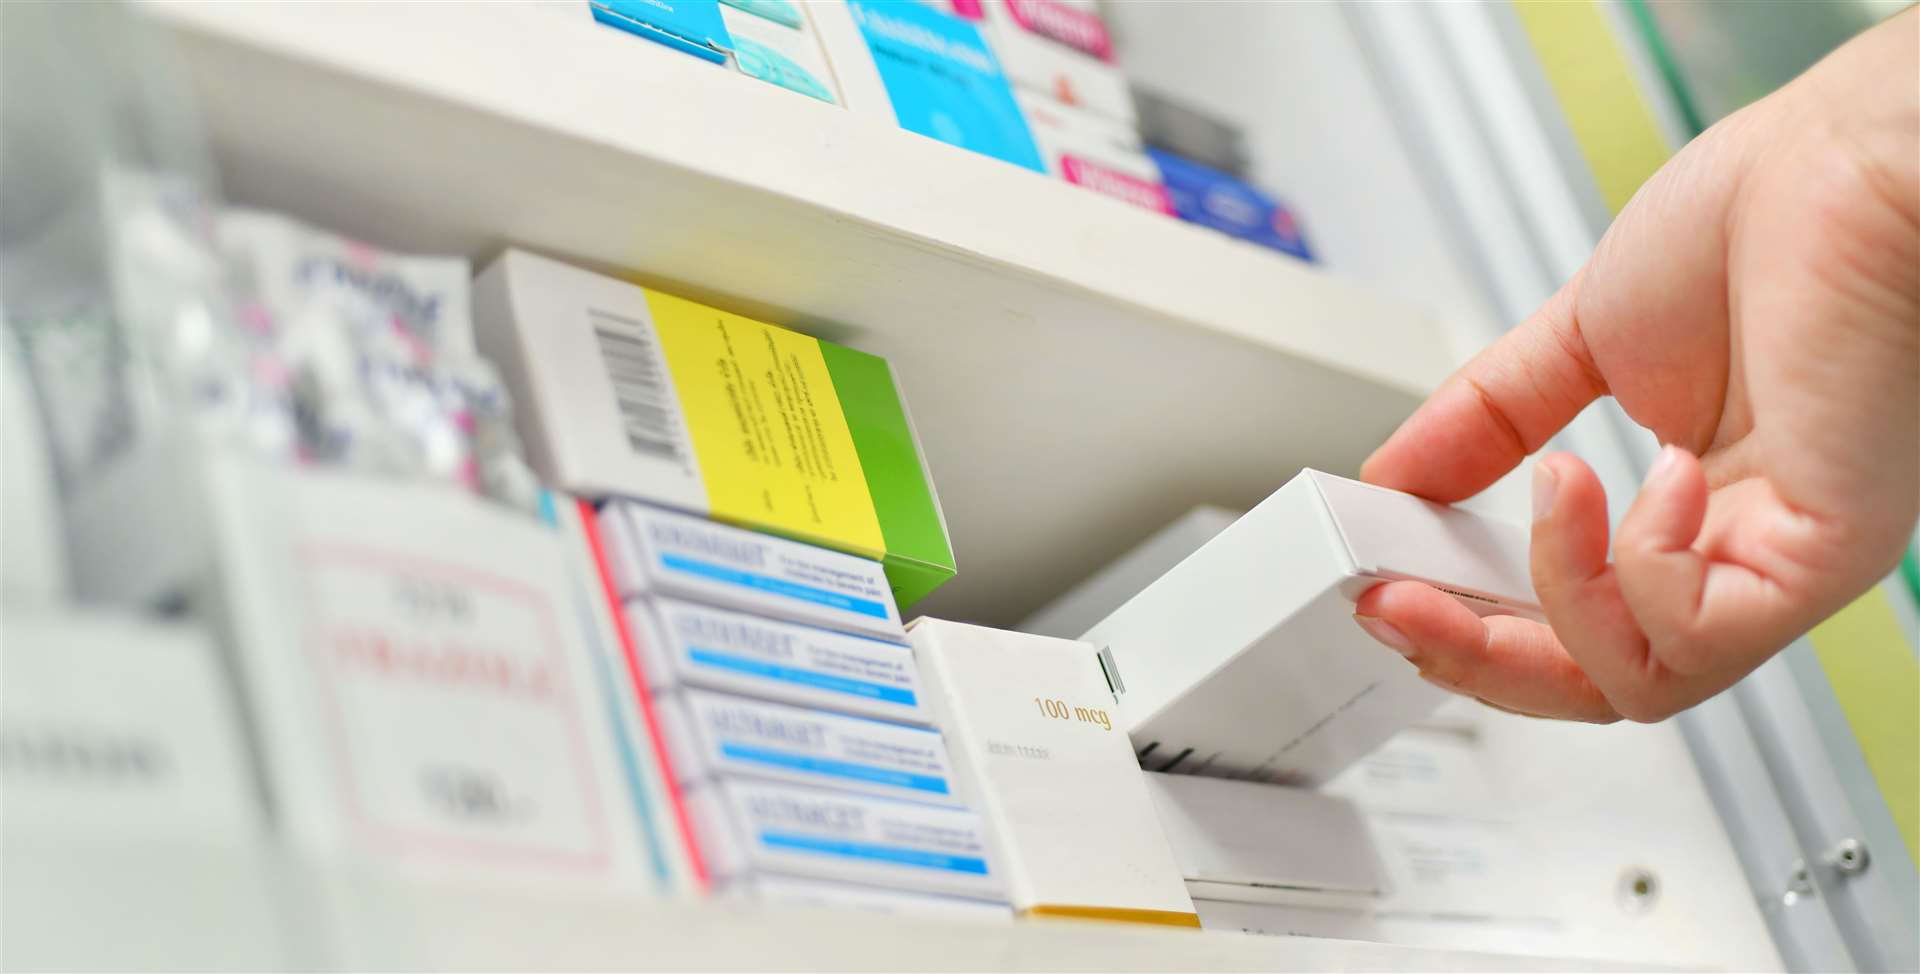 Numerous medicines are now being removed from sale. Image: iStock.